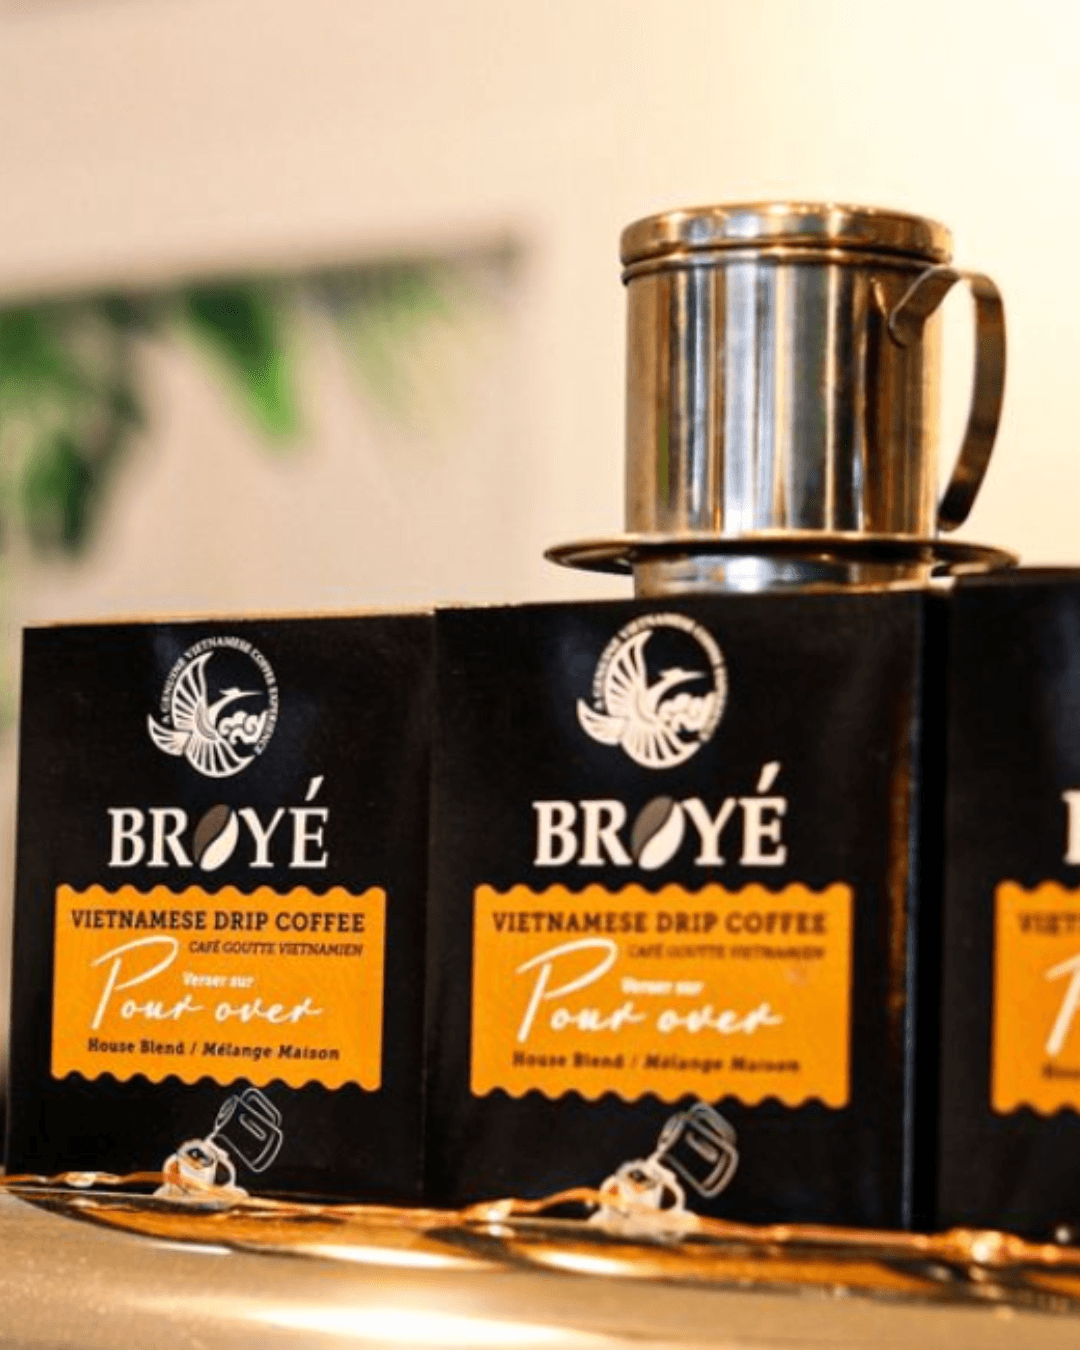 Coffee At Home - Broyé Cafe & Bakery